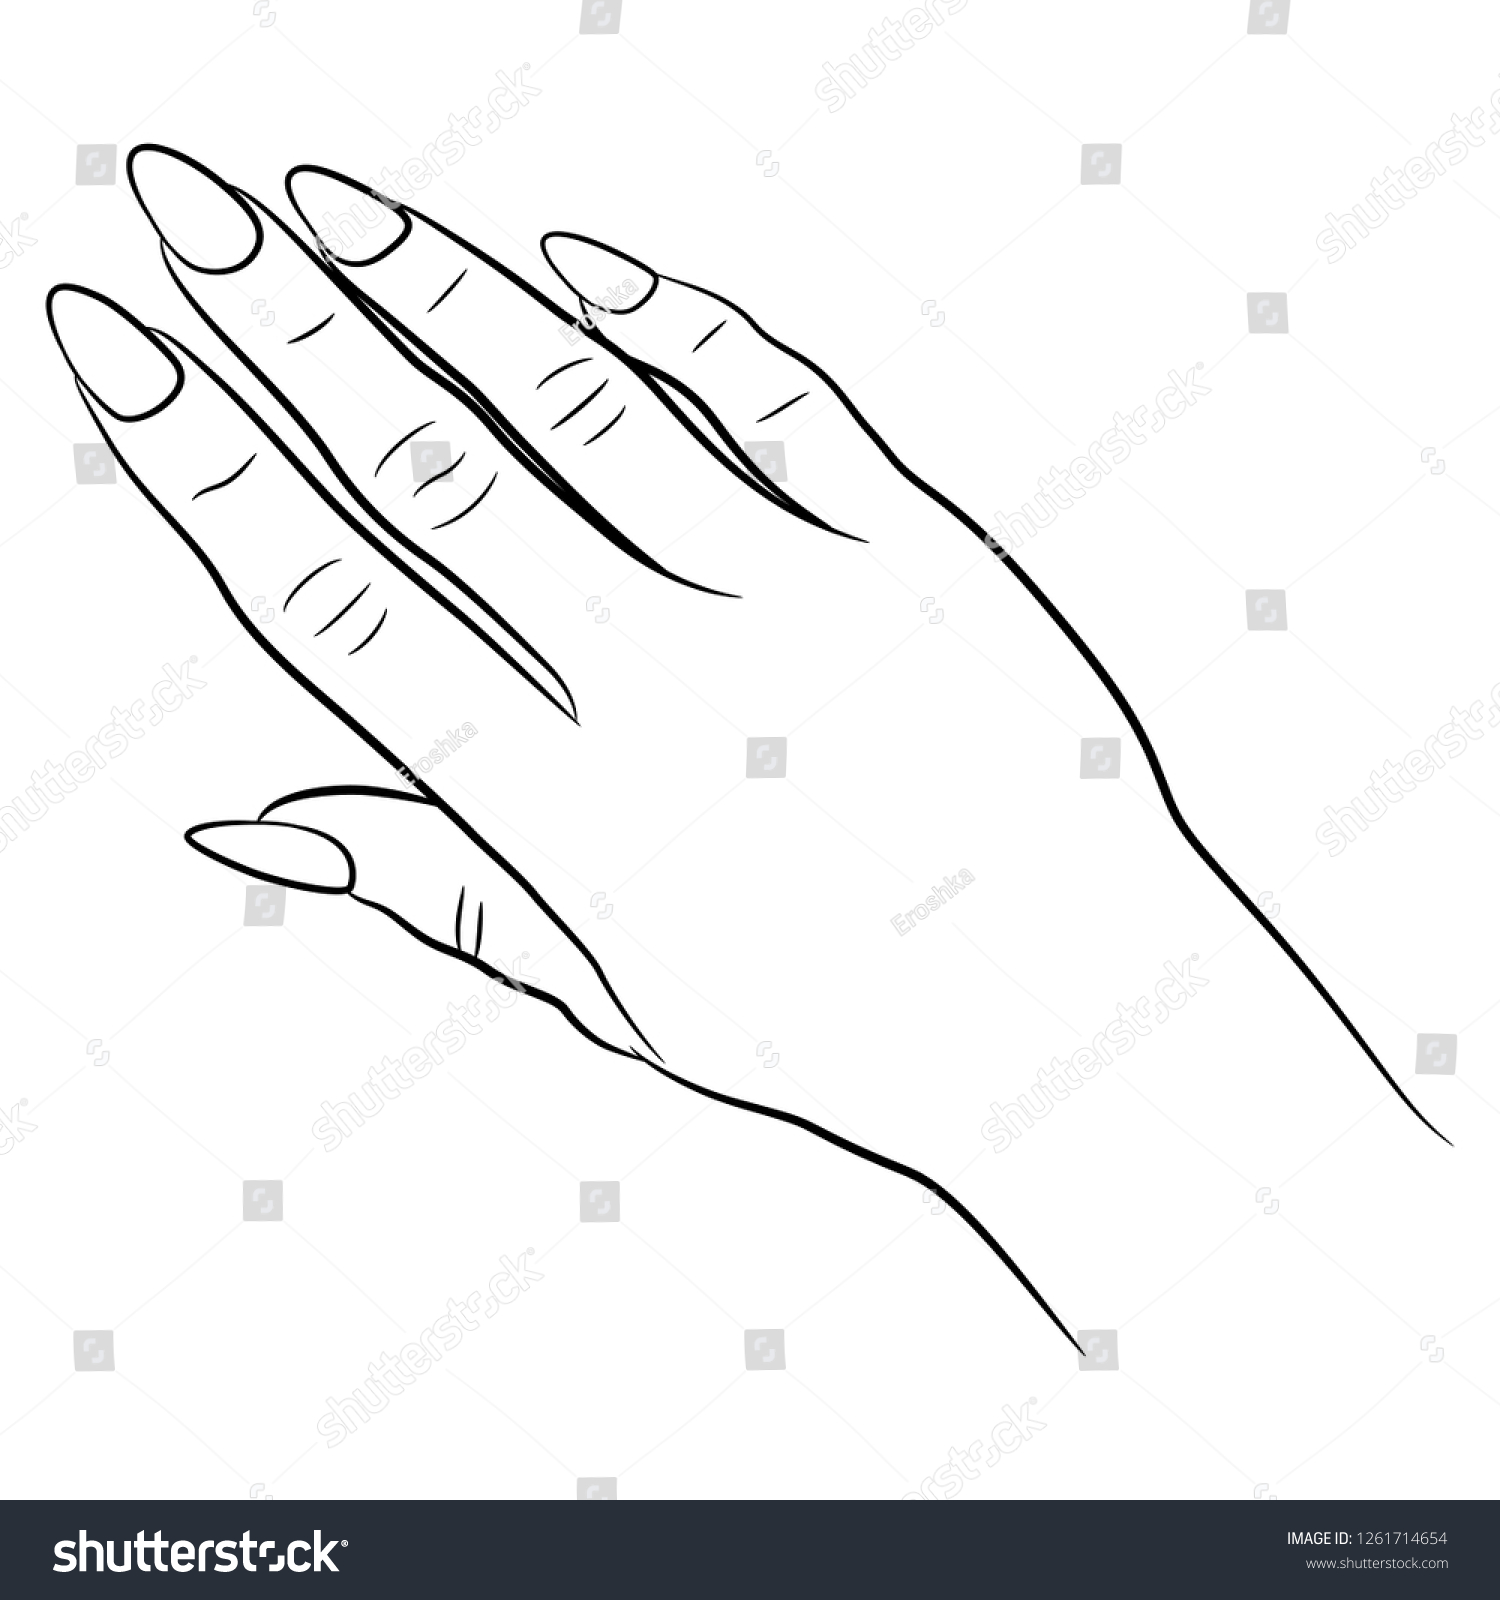 Isolated Vector Illustration Human Female Hand Stock Vector Royalty Free